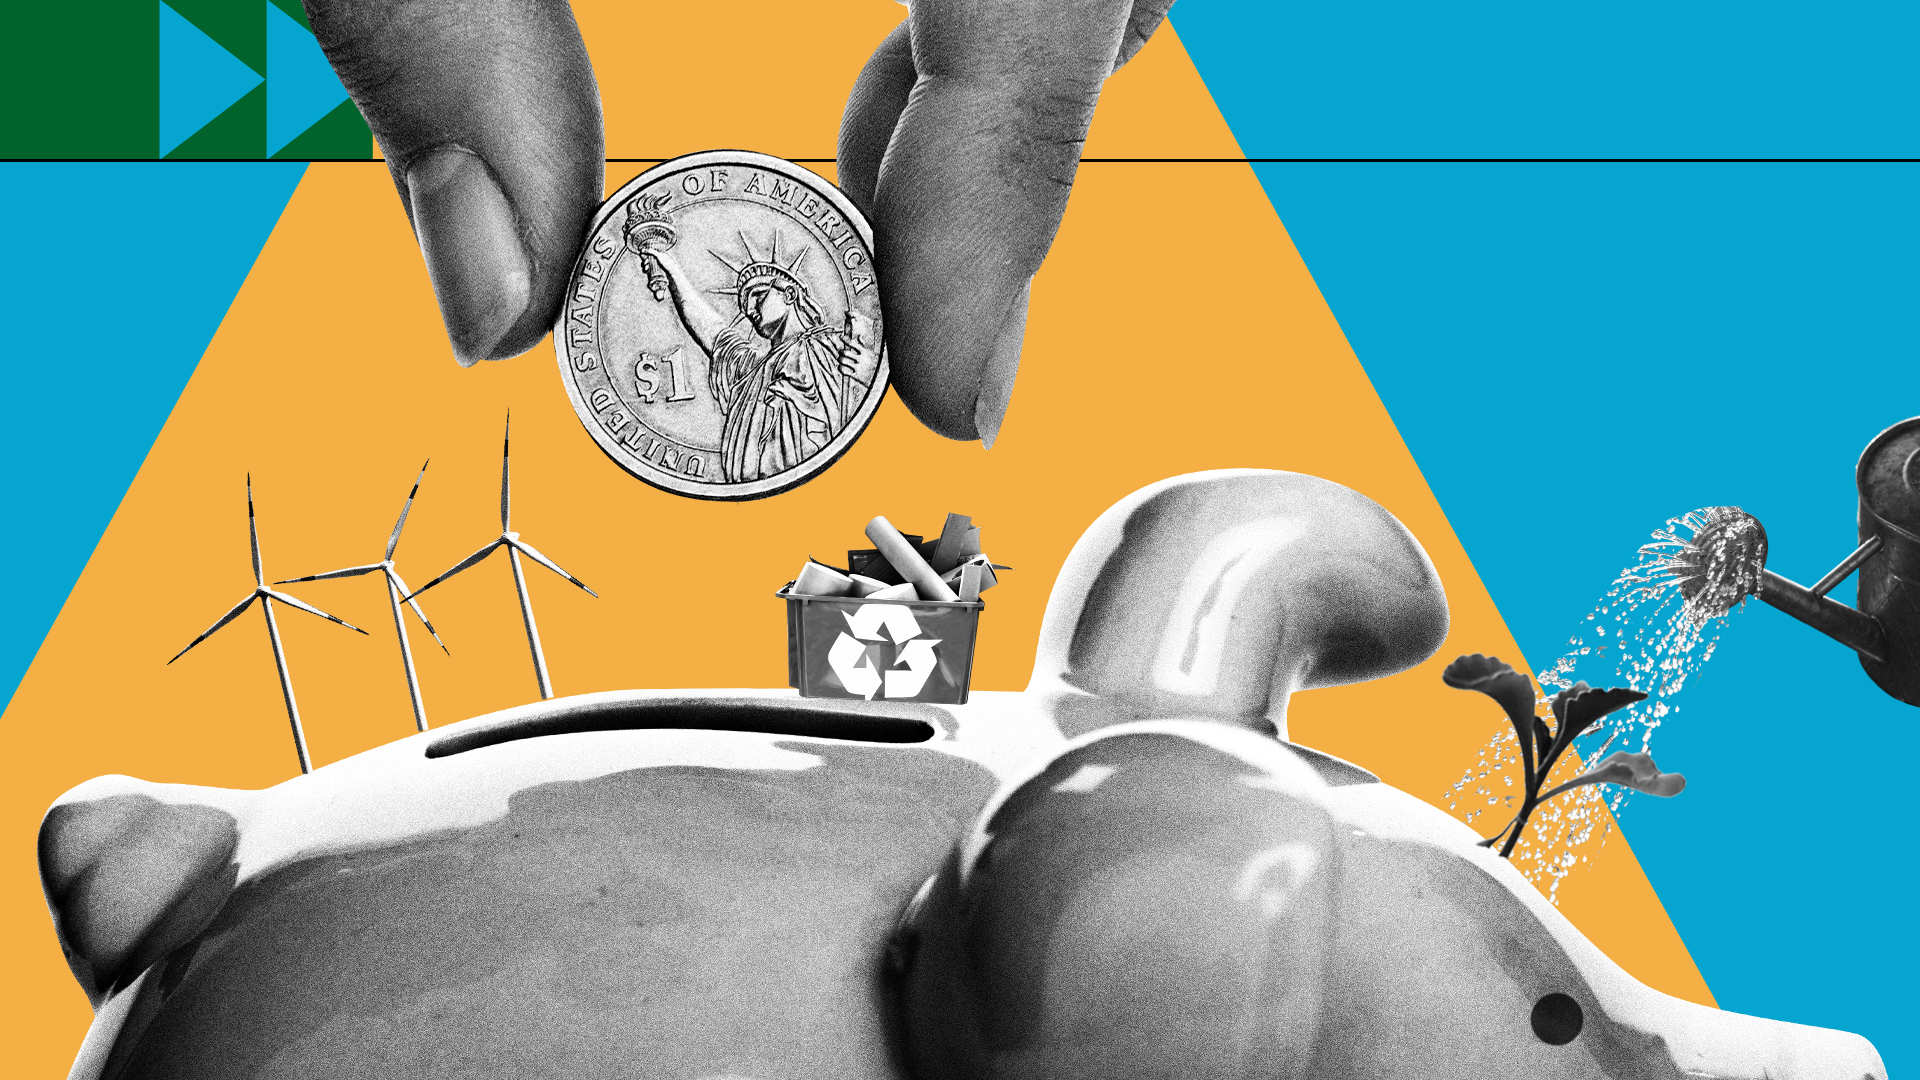 Illustration showing a hand putting a coin in a piggy bank, with small windmills behind it